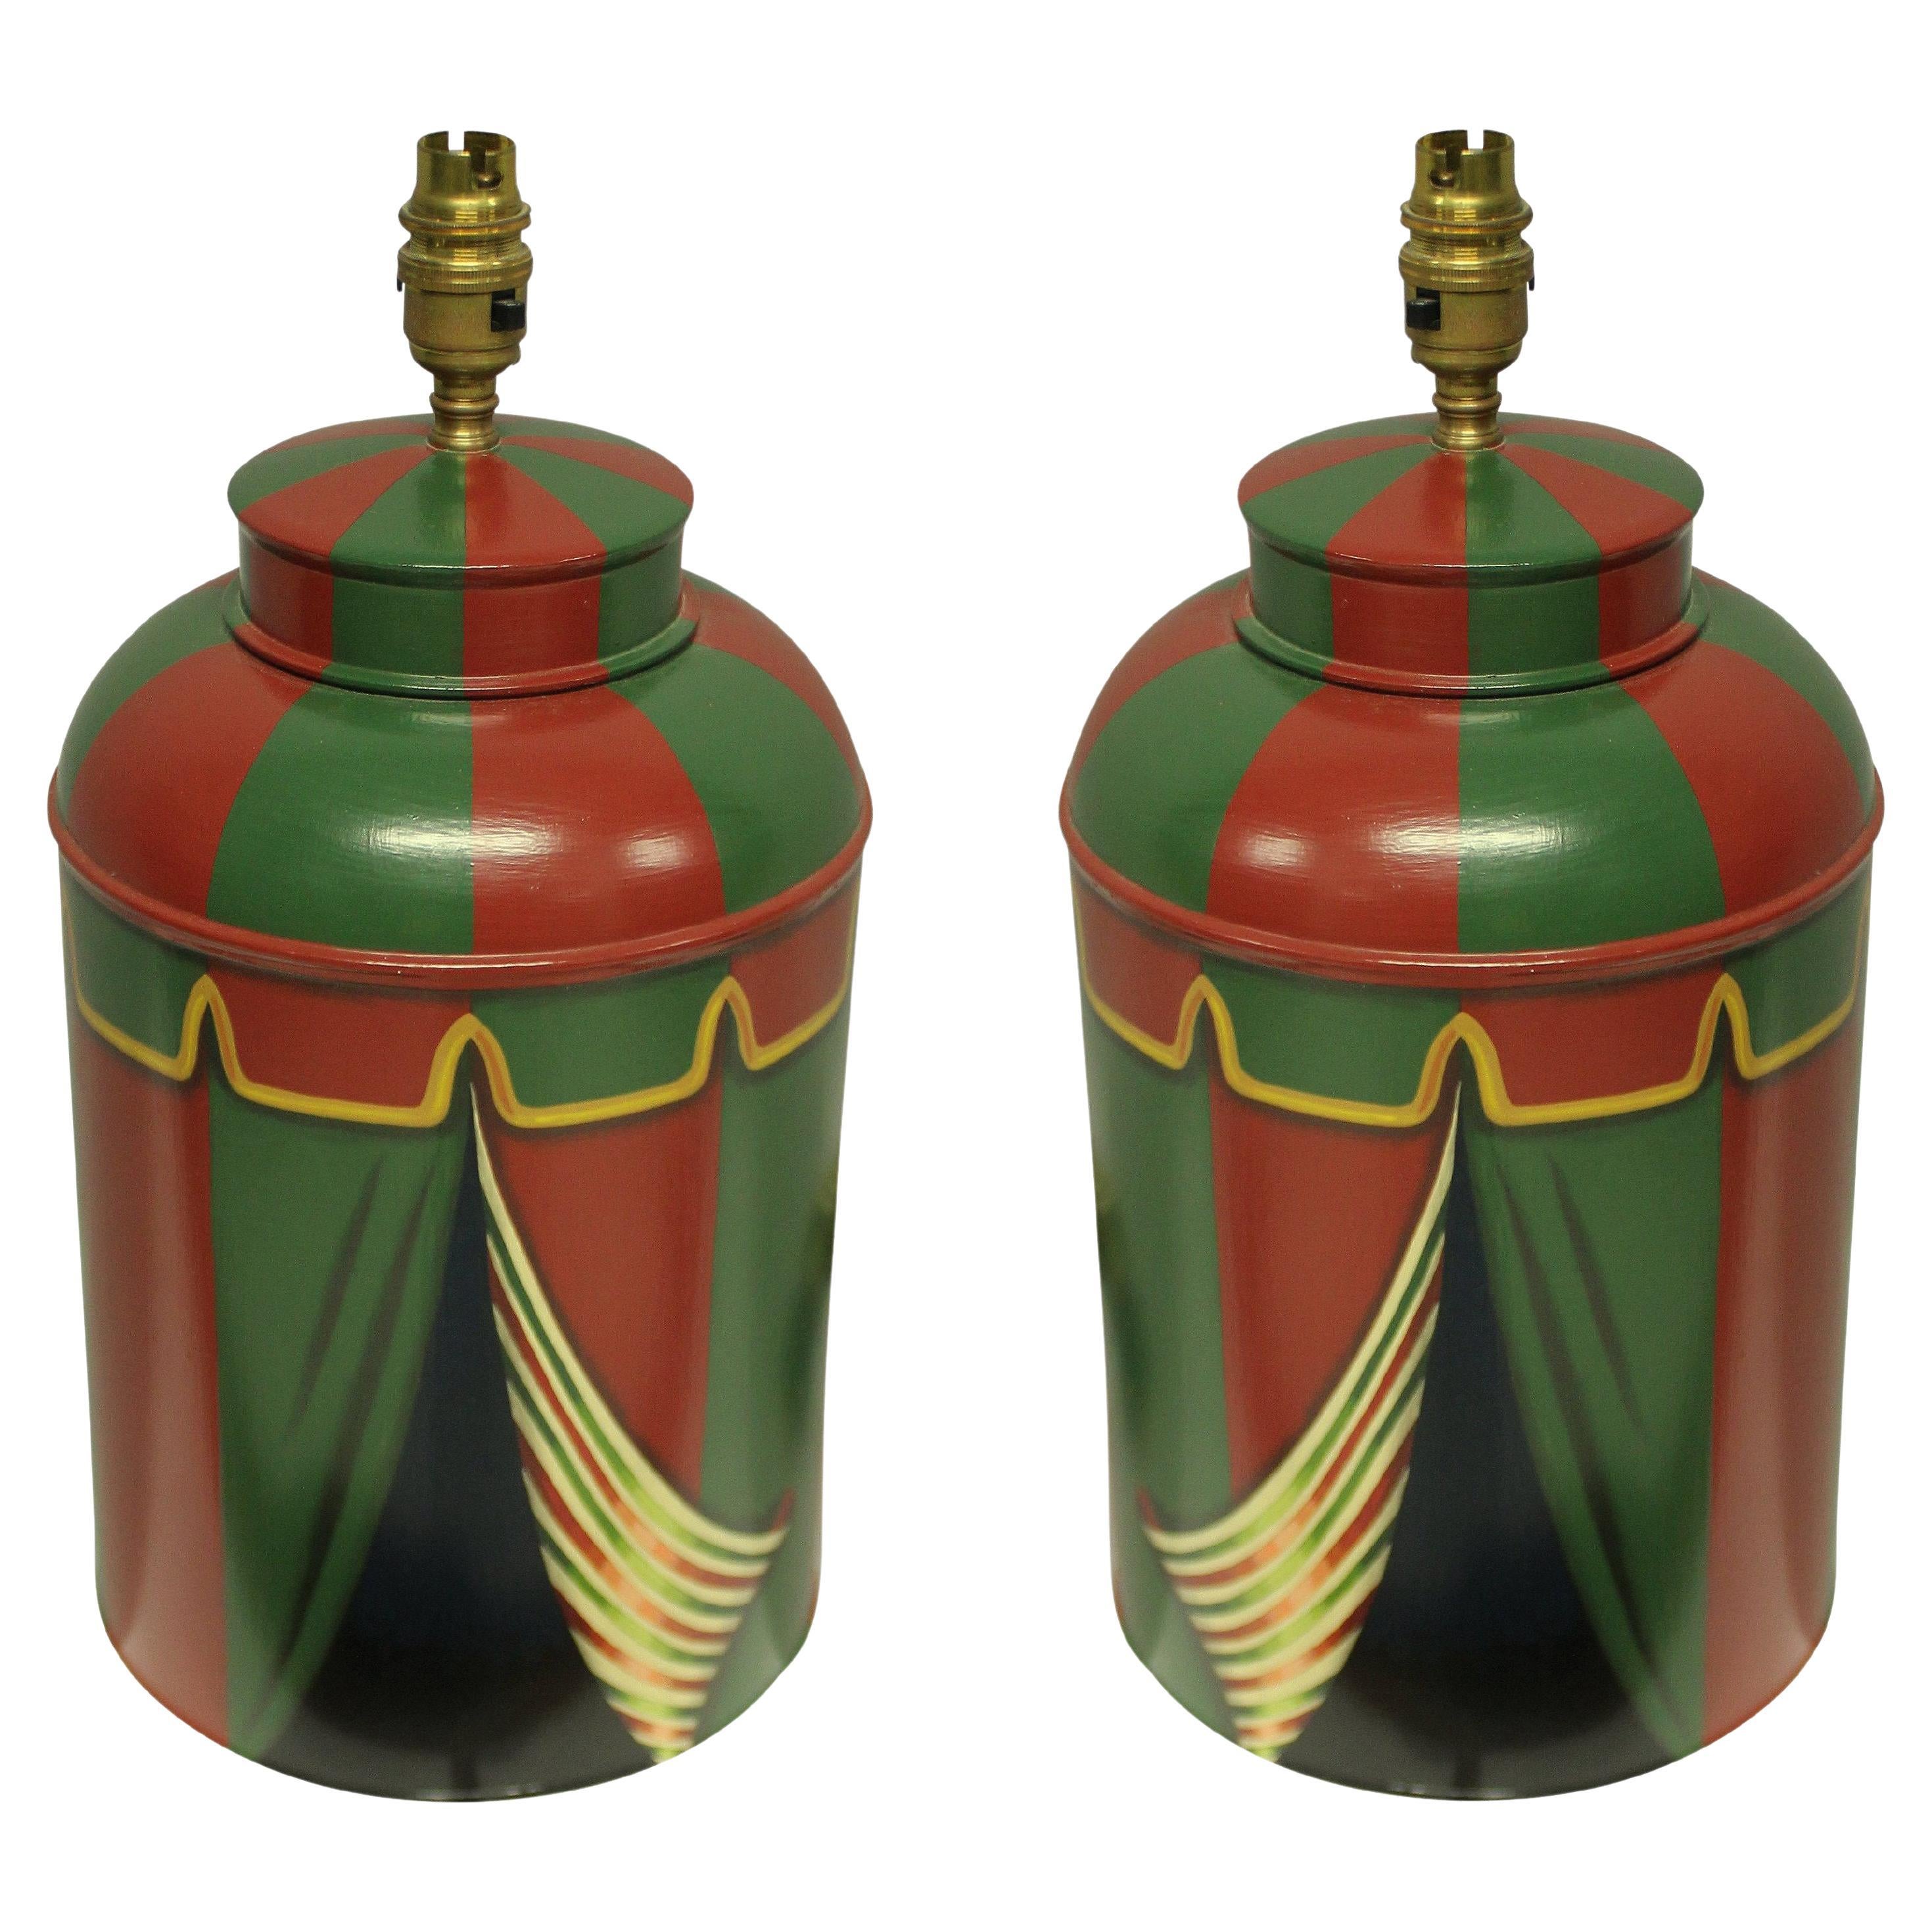 Pair of Hand Painted Toleware Lamps